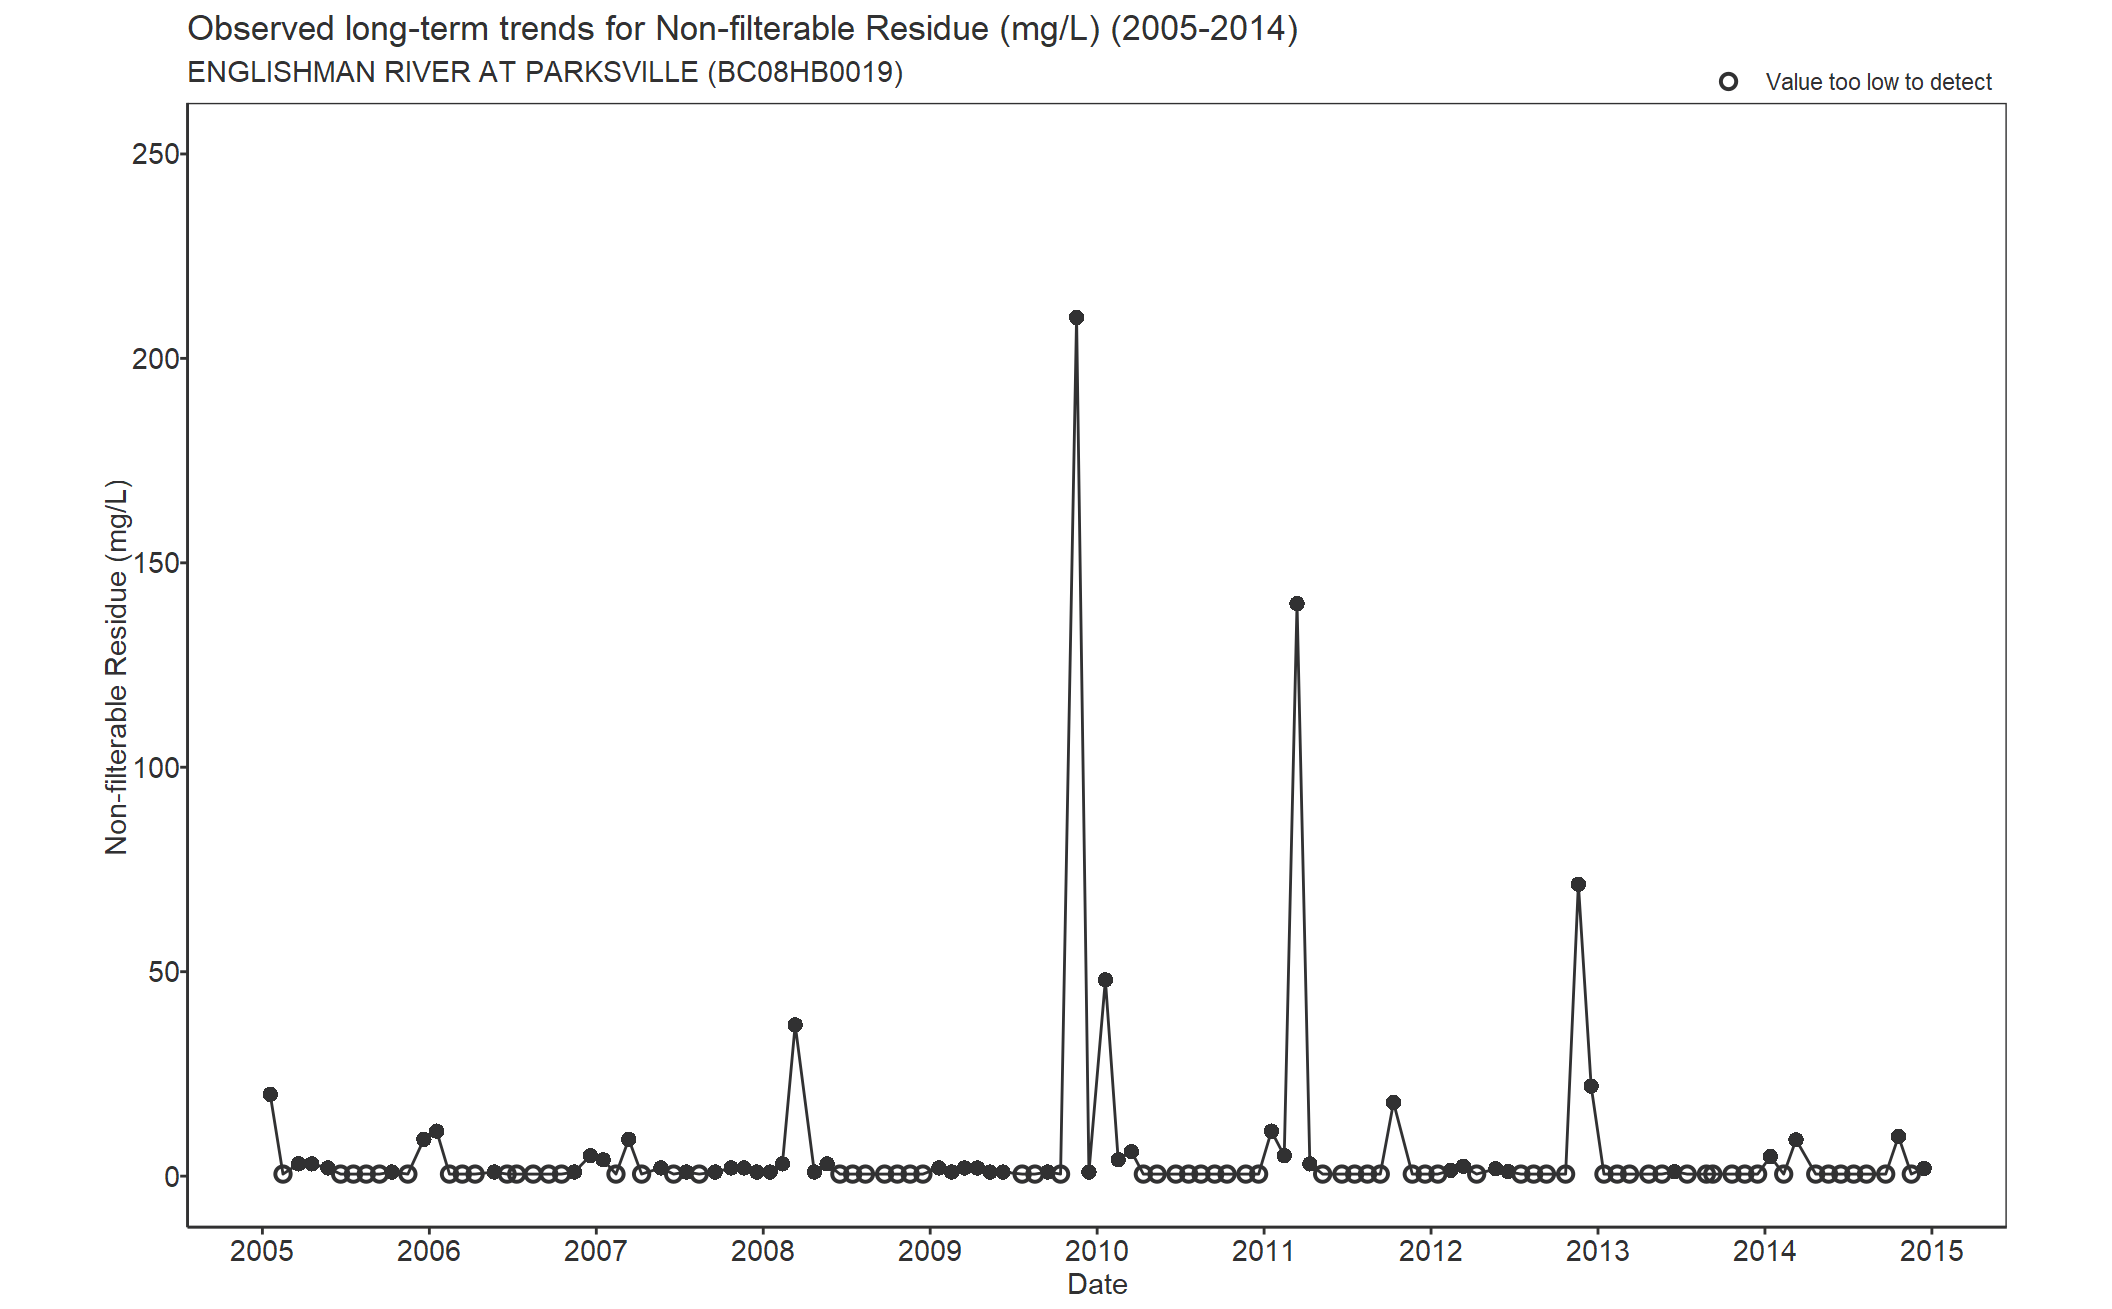 Observed long-term trends for Non-filterable Residue (2005-2014)